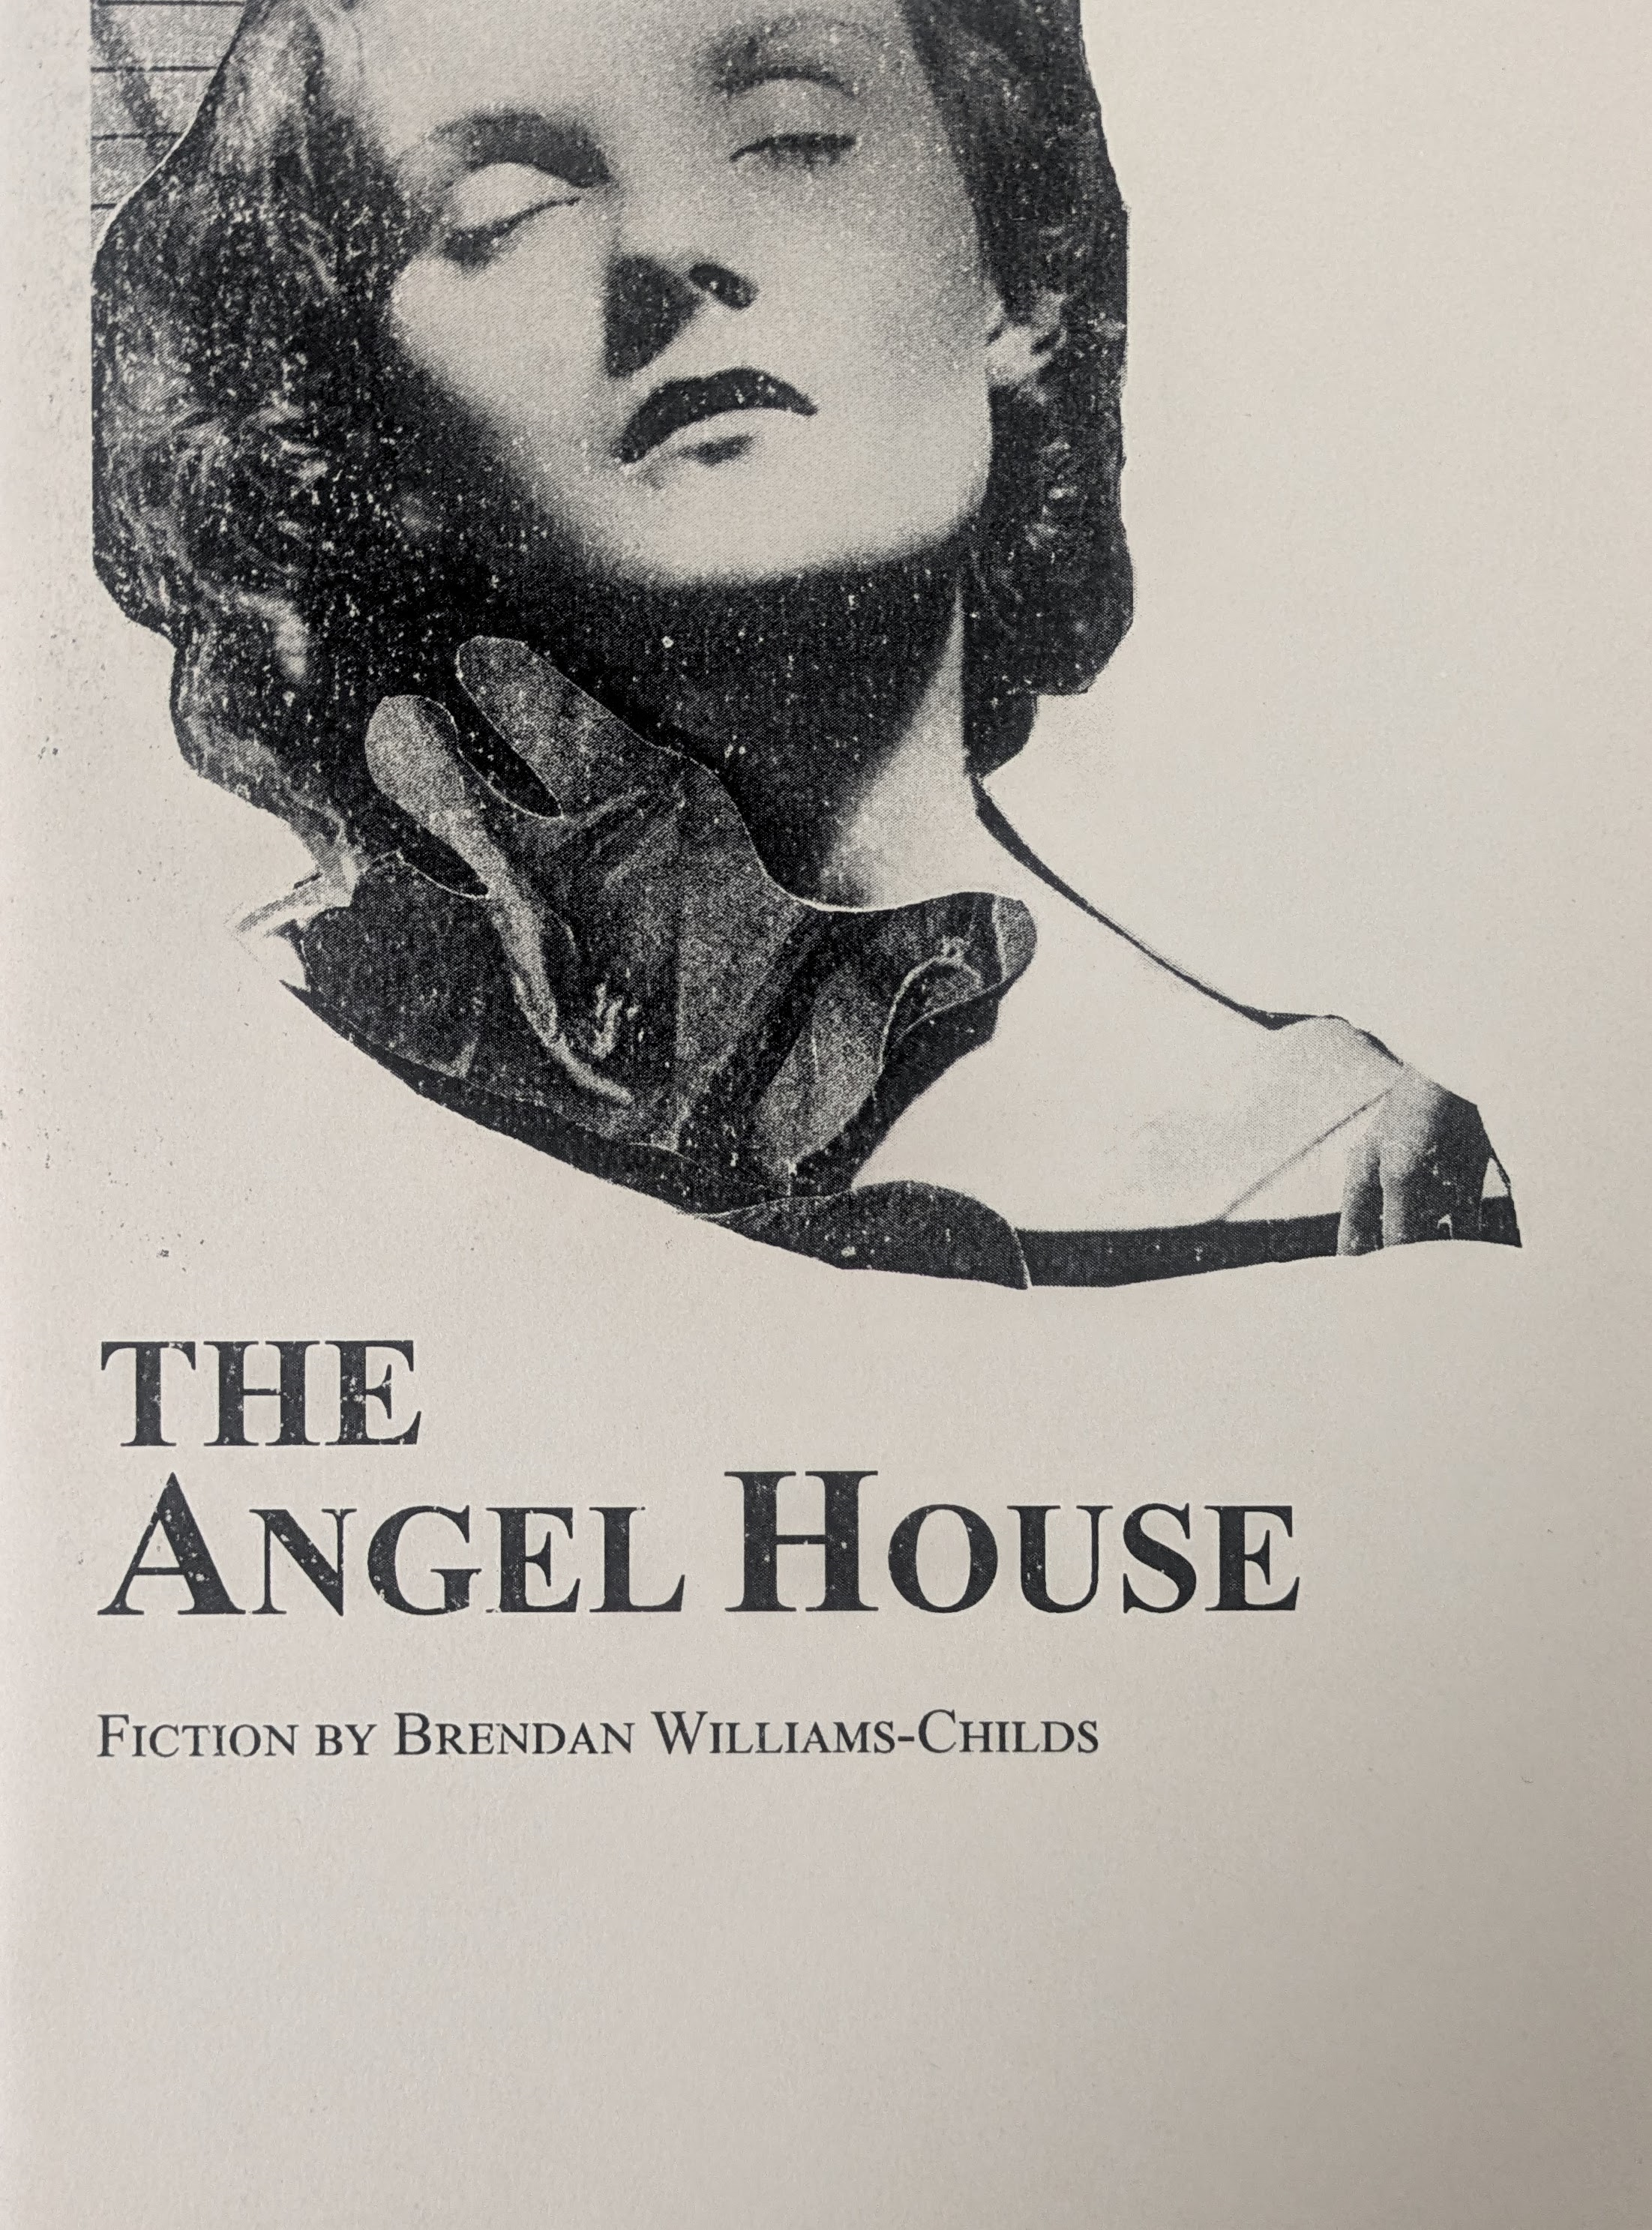 The cover of the zine “The Angel House.” A collage of a sleeping woman with a man’s hand around her neck. The hand is covered in the image of other hands.